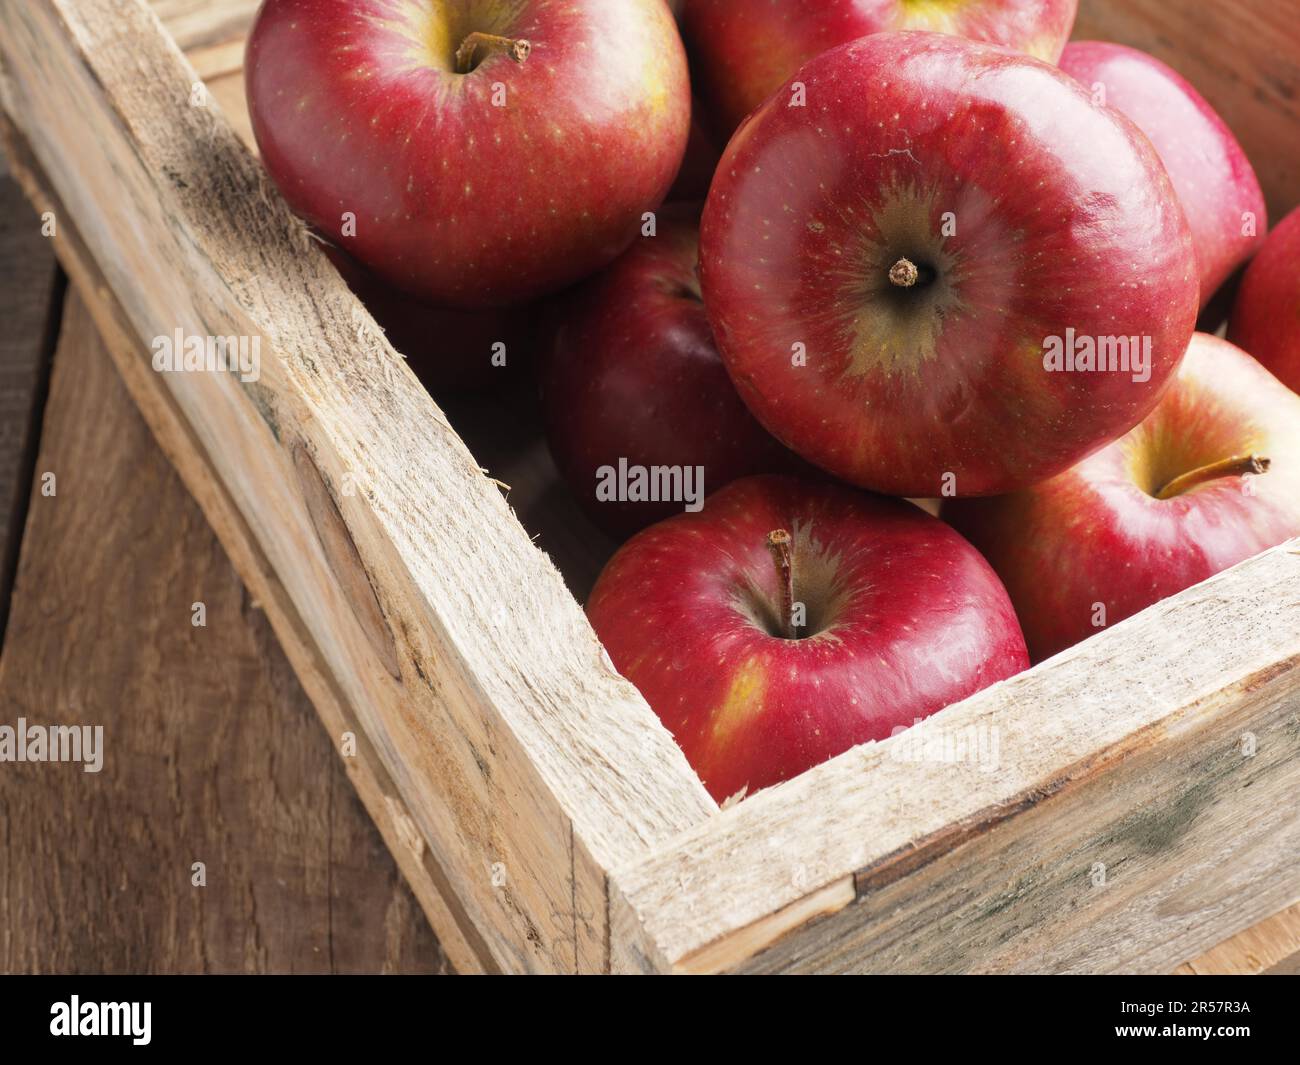 https://c8.alamy.com/comp/2R57R3A/fresh-red-organic-apples-in-a-wooden-box-after-harvesting-seasonal-food-agriculture-concept-2R57R3A.jpg